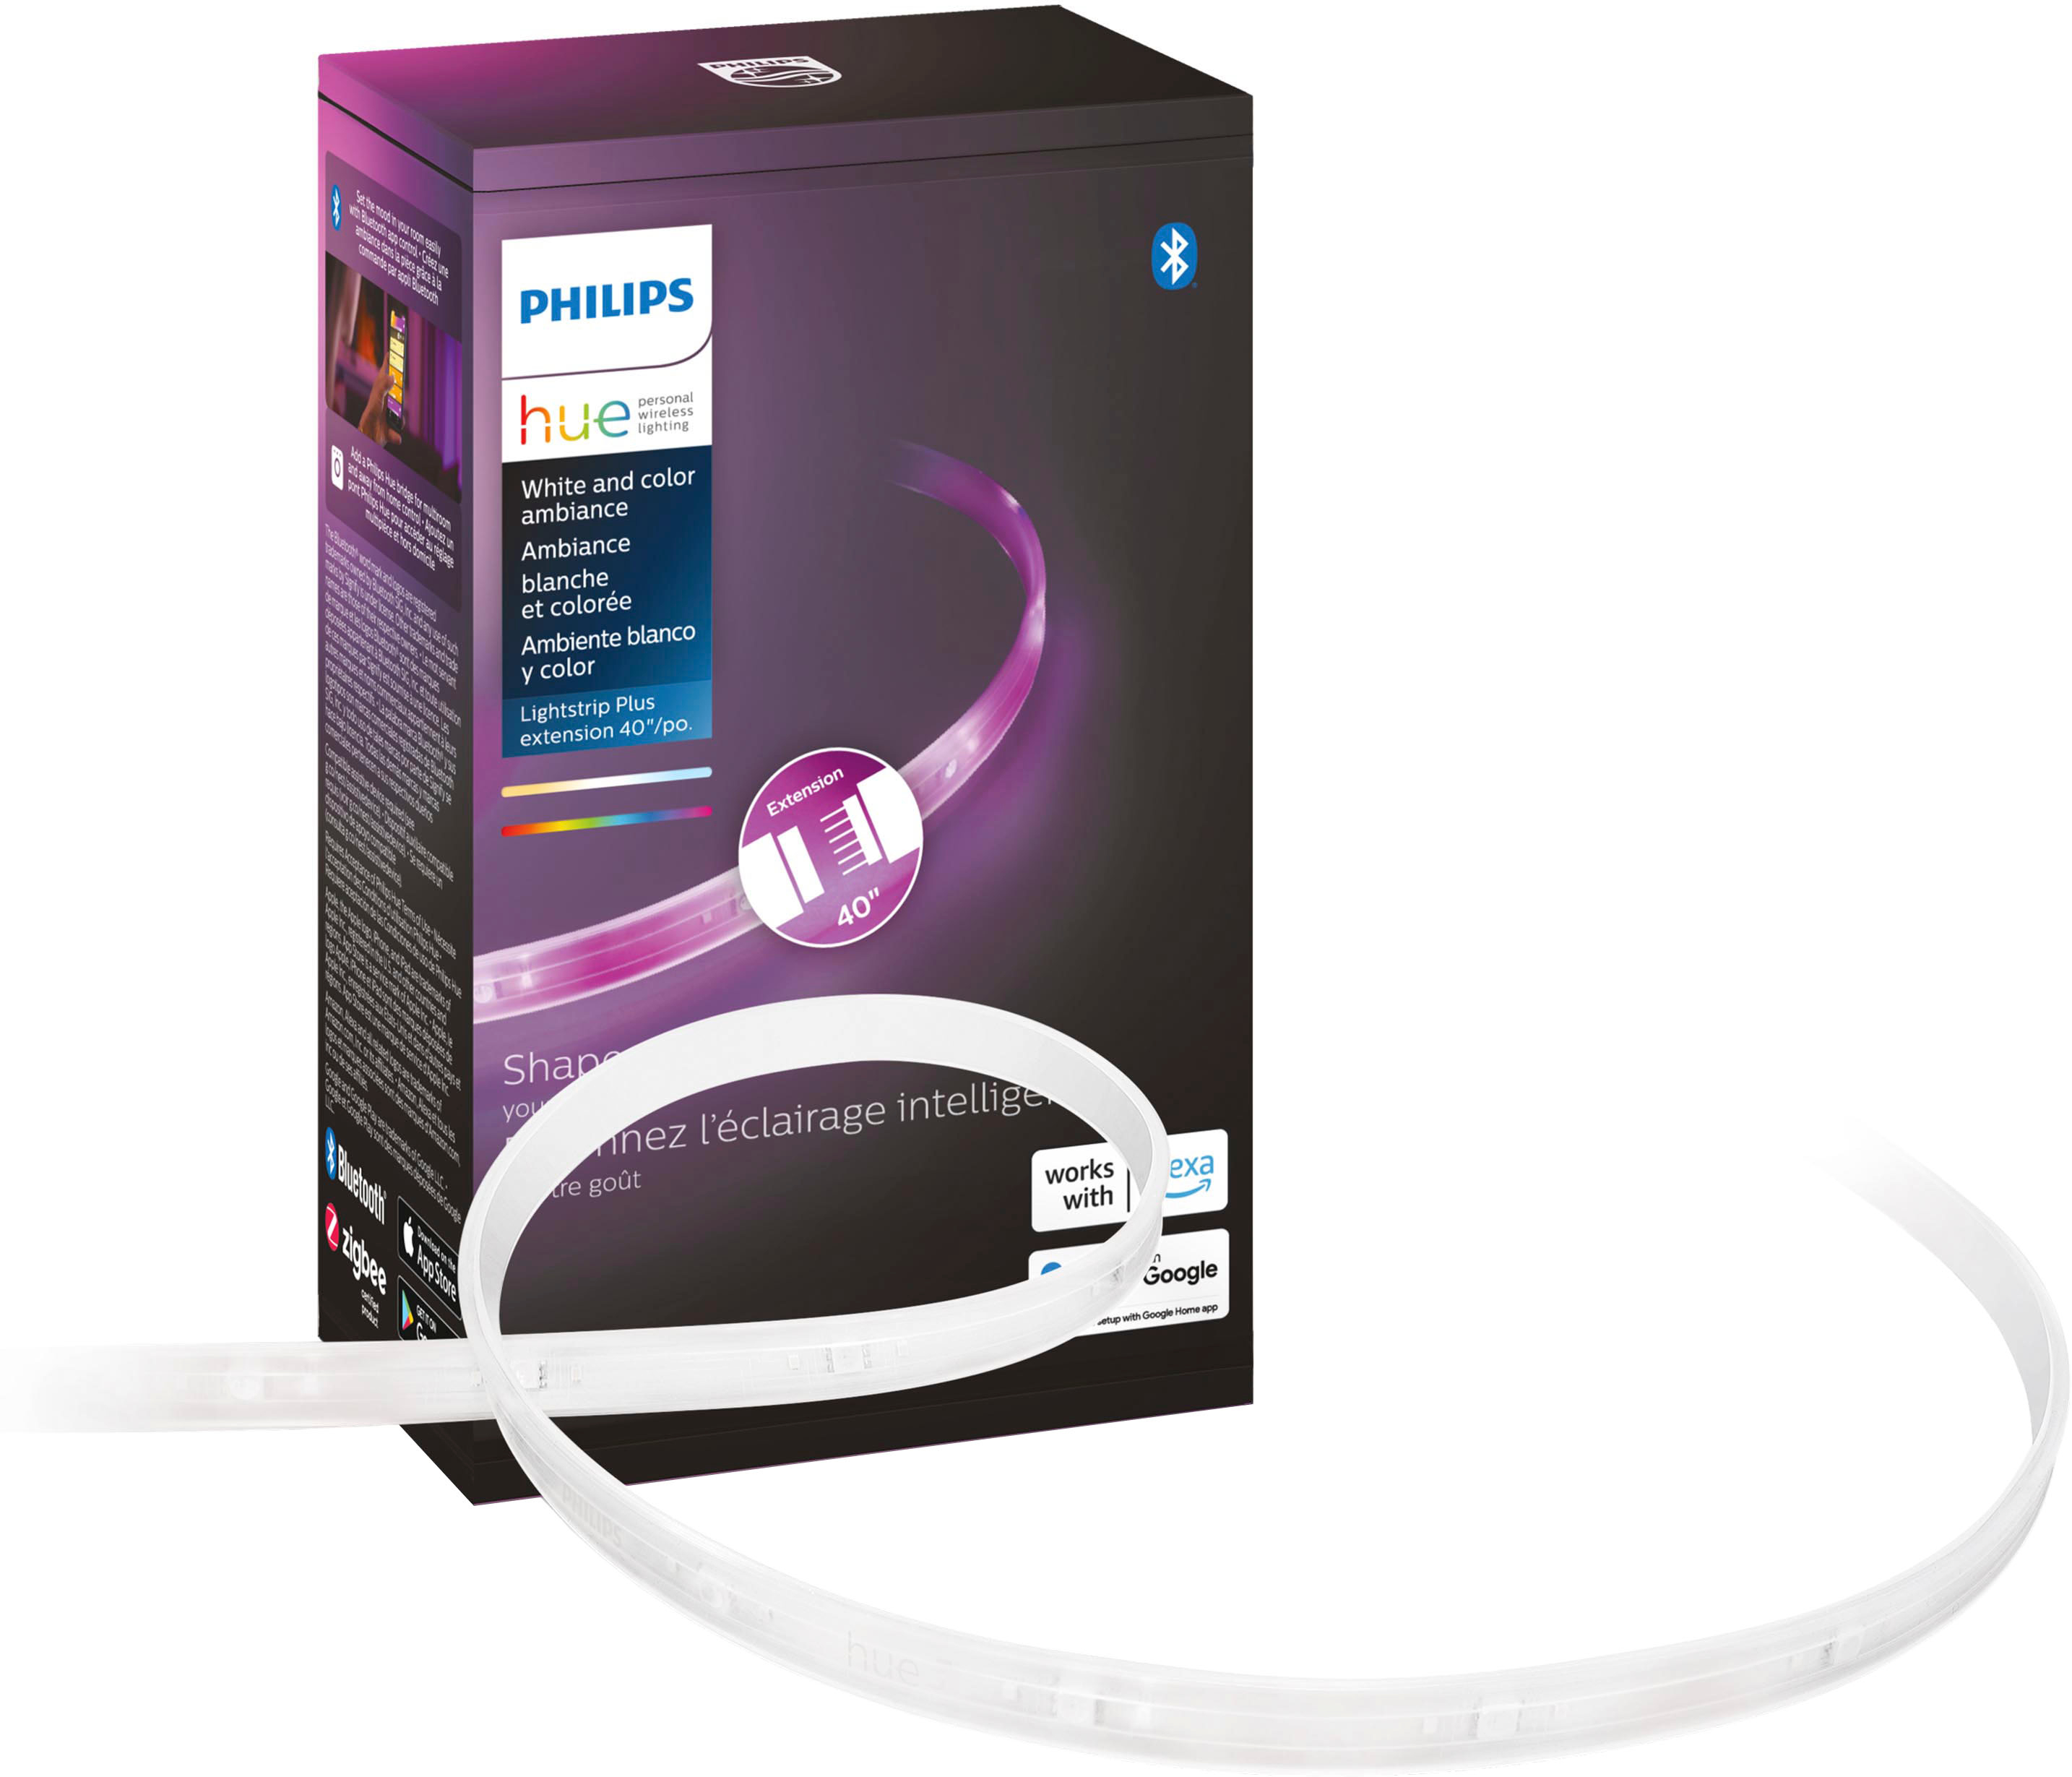 Philips Hue Lightstrip Plus 40-inch White and Color 555326 - Best Buy